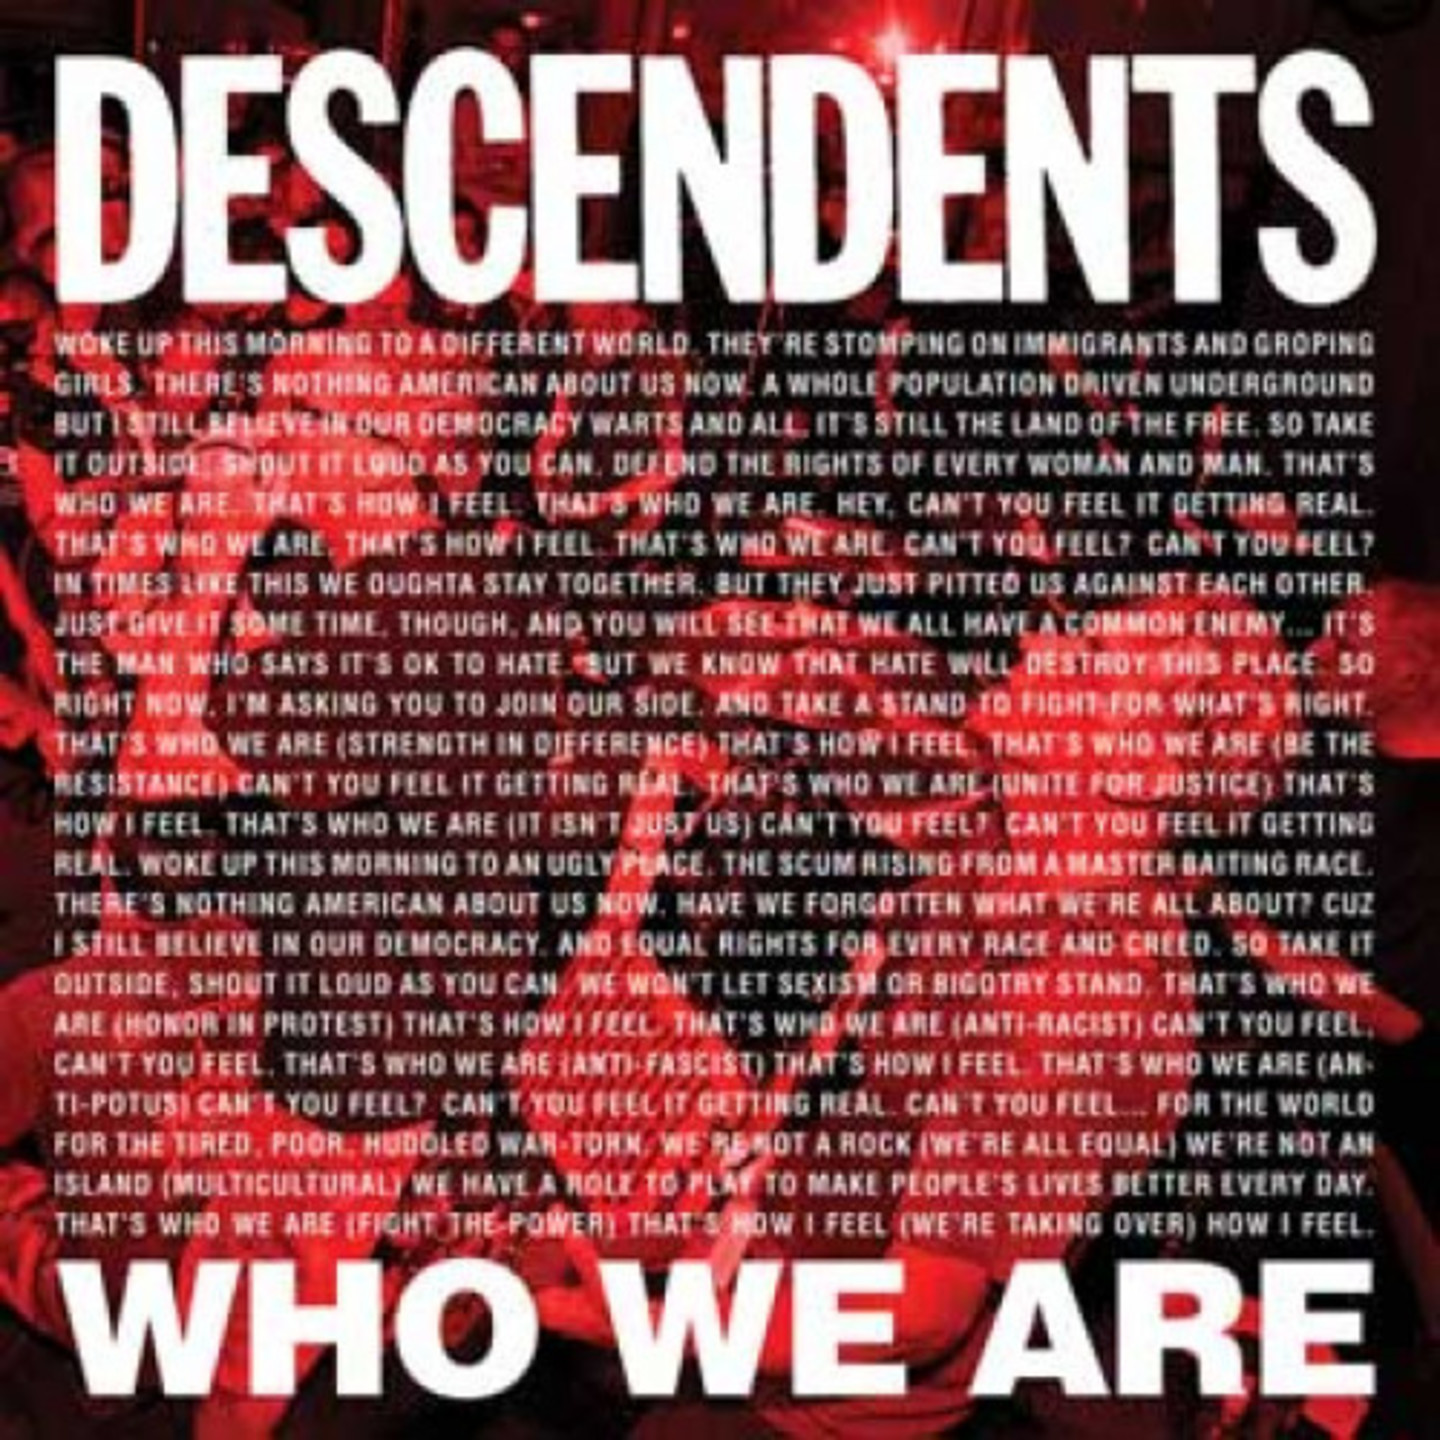 DESCENDENTS - Who We Are 7